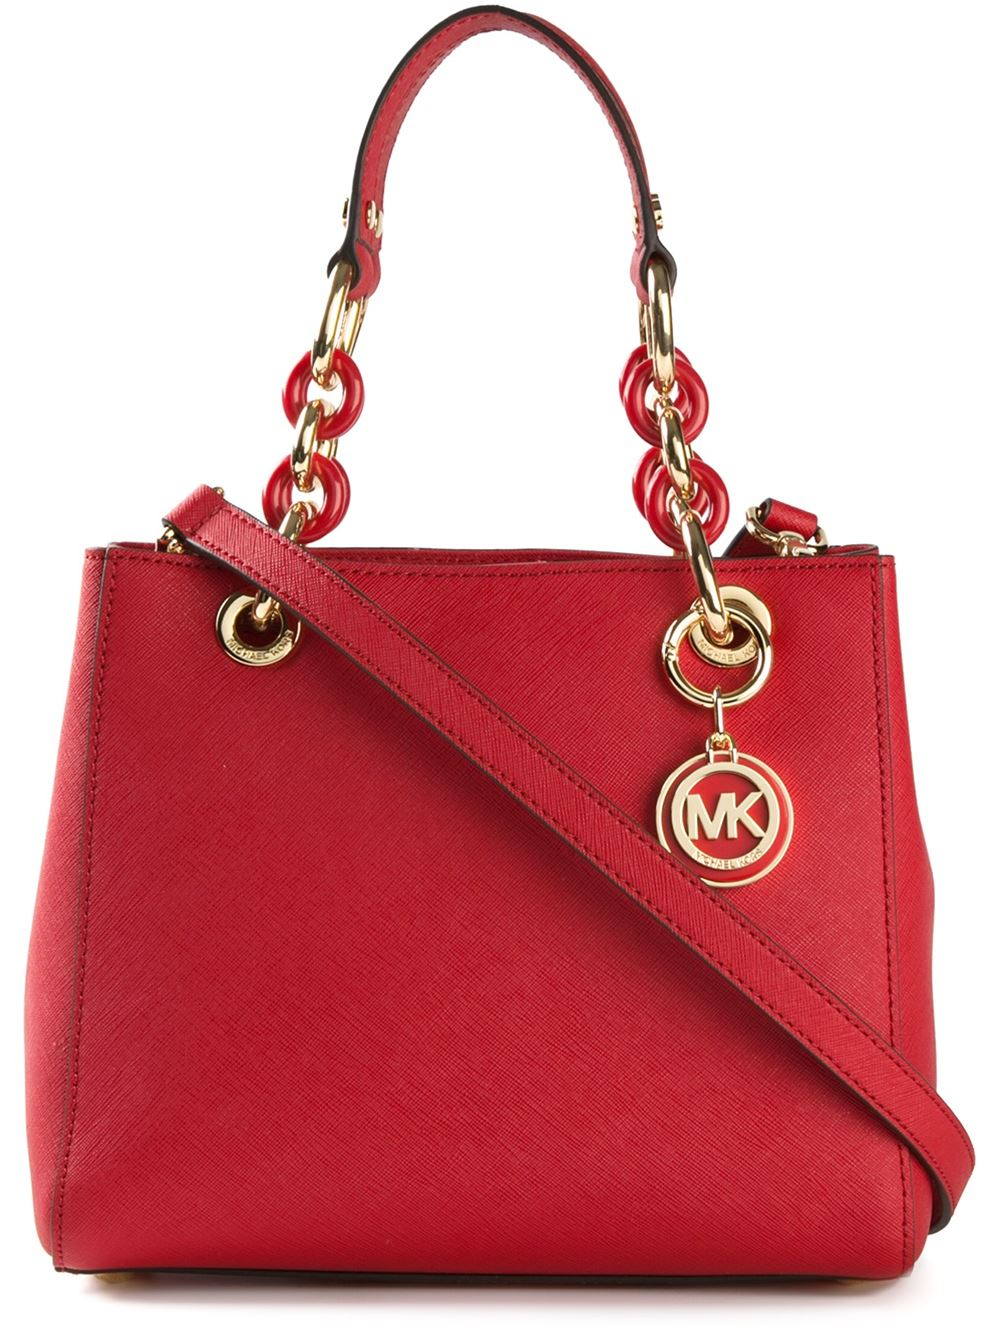 MICHAEL Michael Kors Cynthia Leather Bag in Red - Lyst